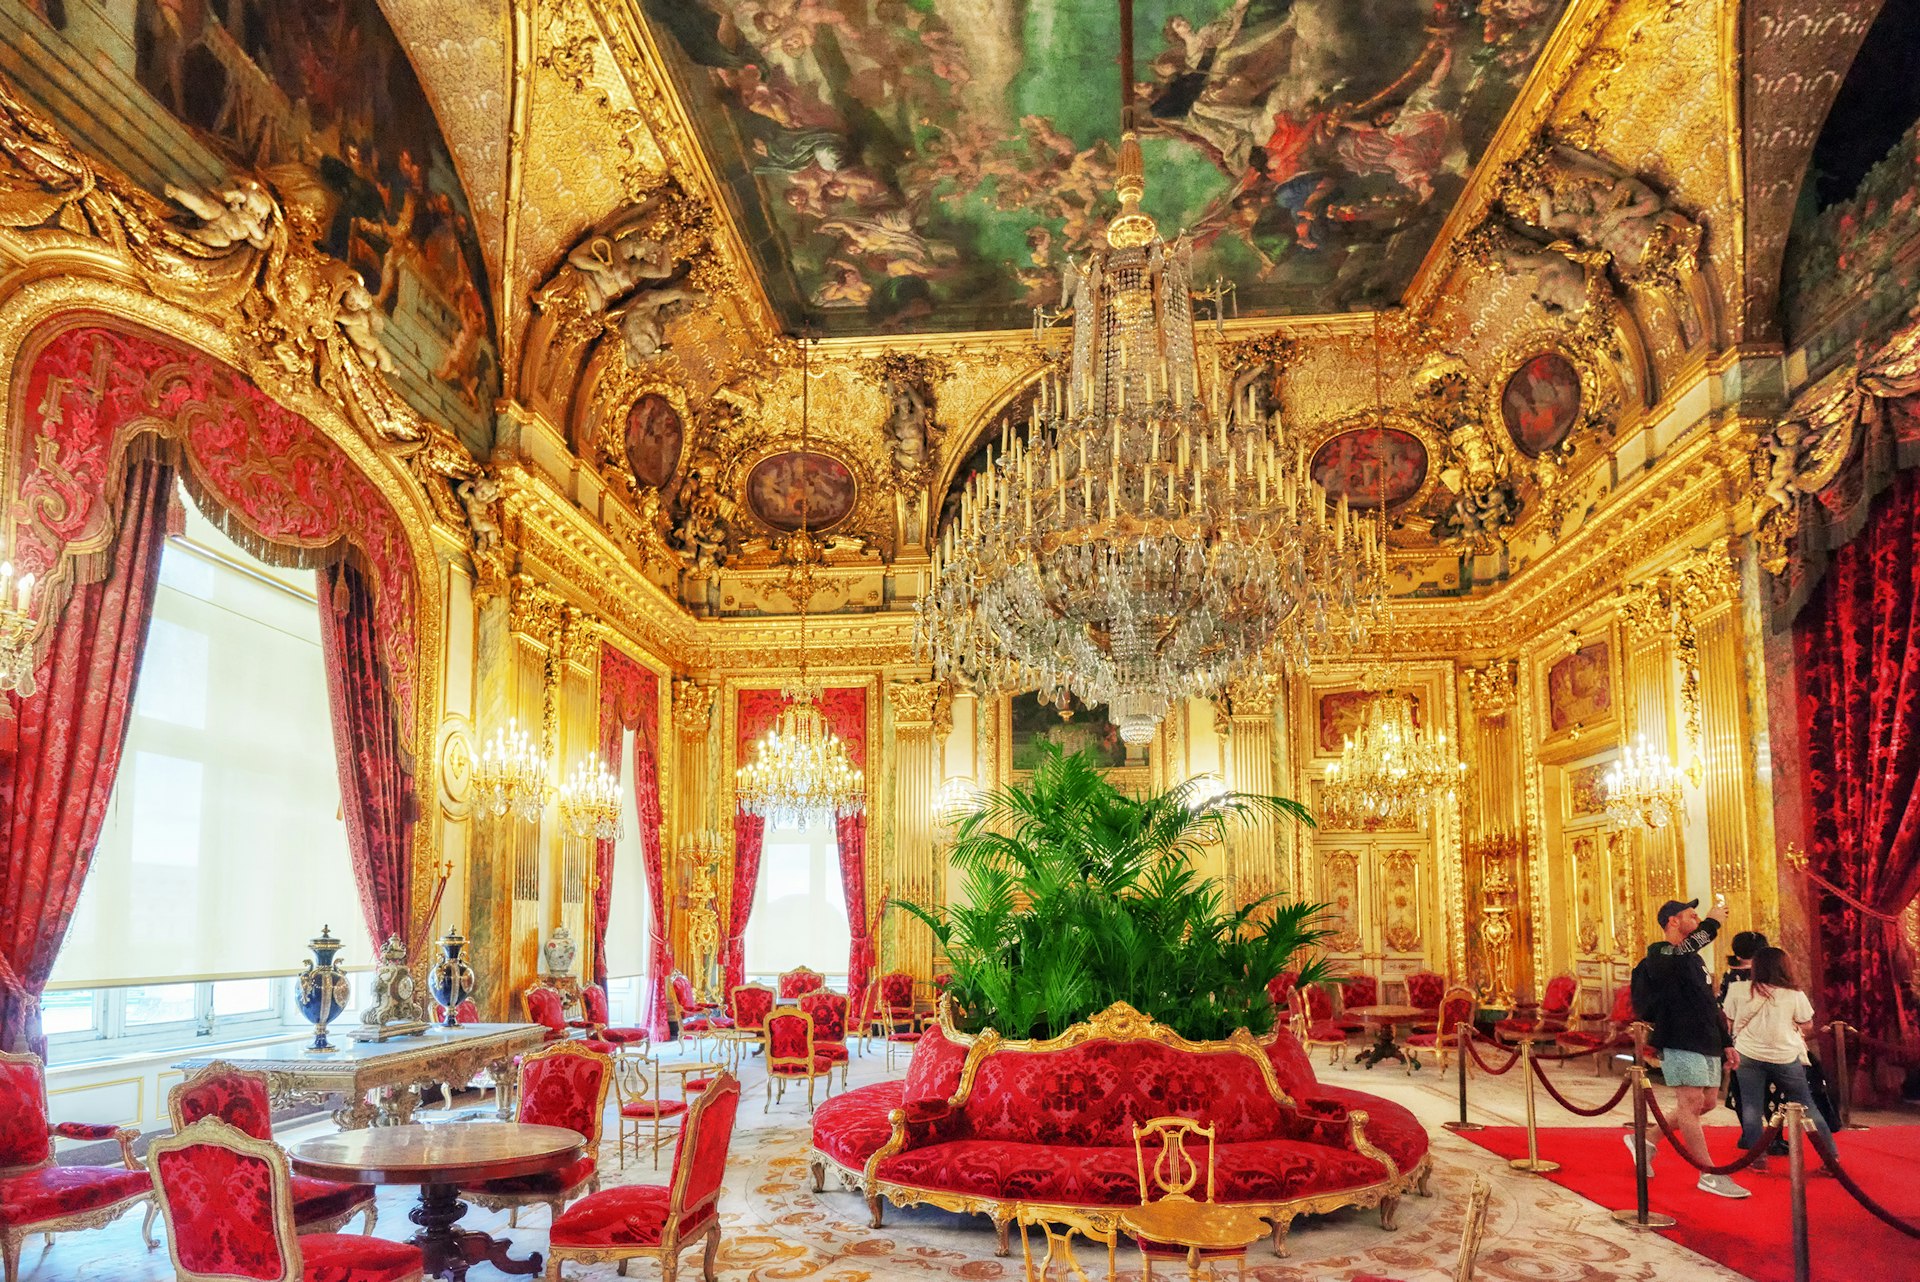 An opulent red and gold apartment at the Louvre. 